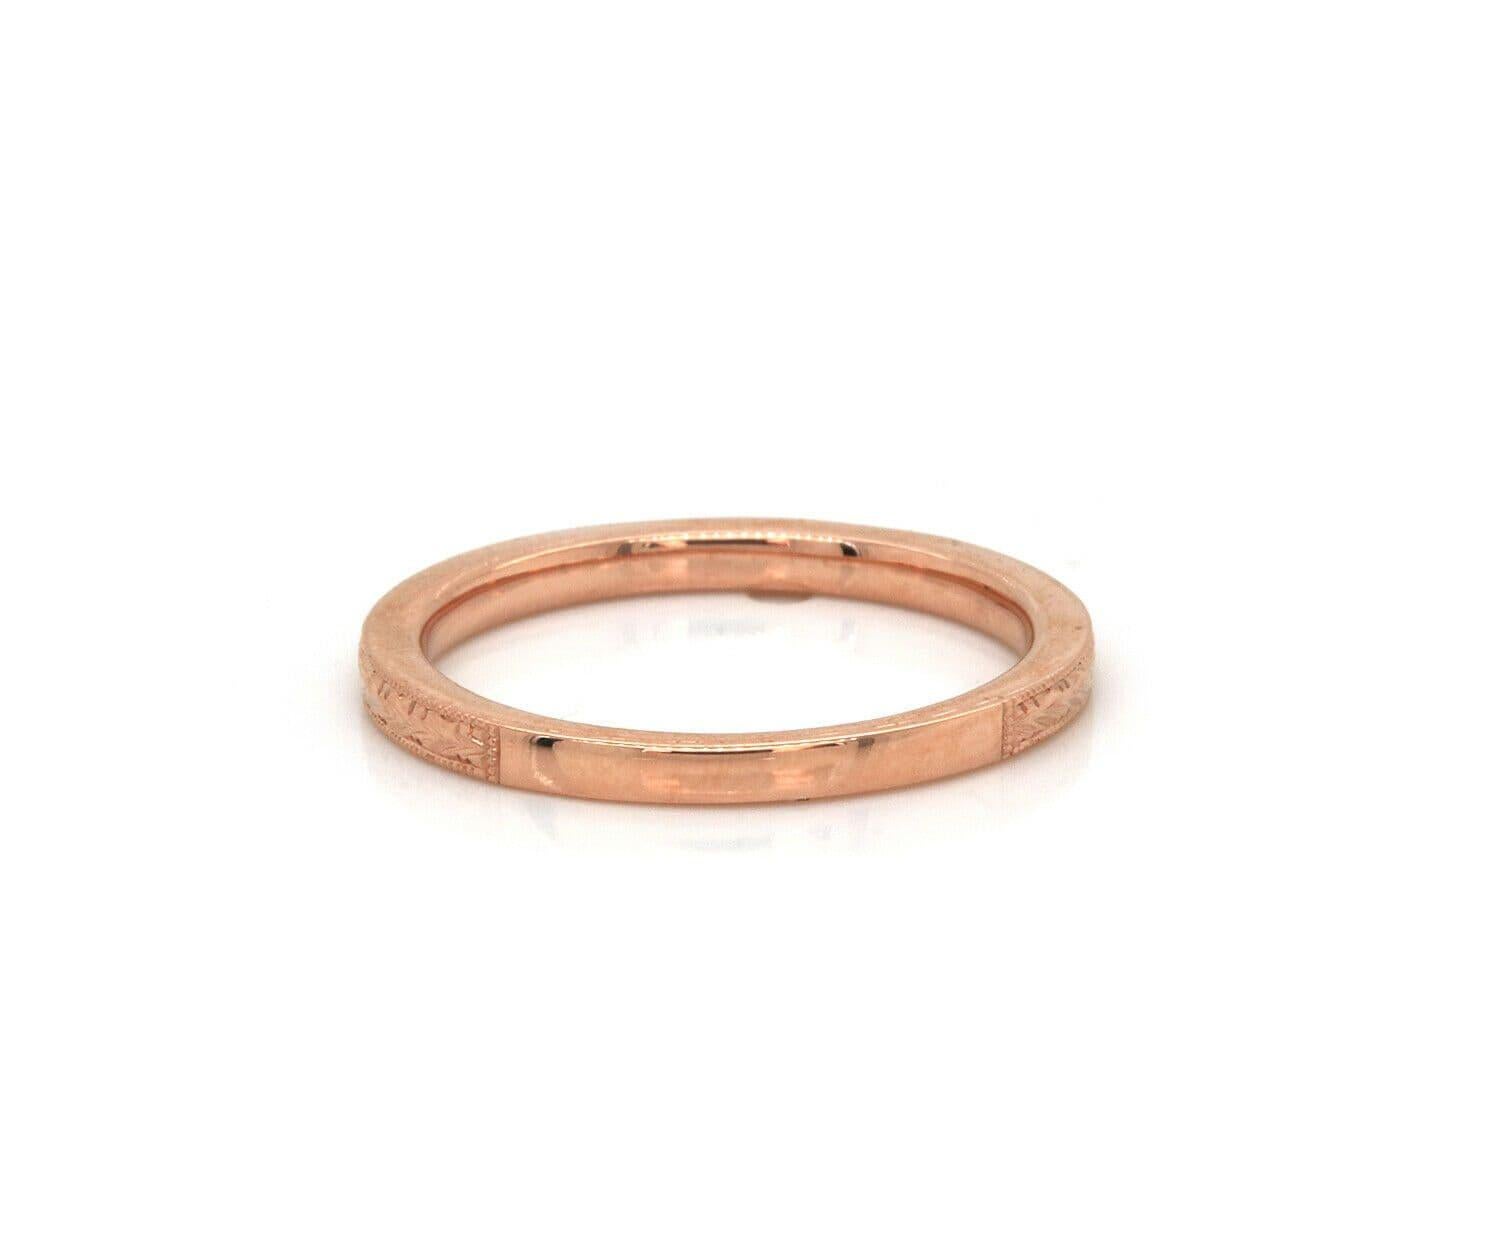 New Gabriel & Co. Filigree Engraved Band Ring in 14K Rose Gold In New Condition For Sale In Vienna, VA